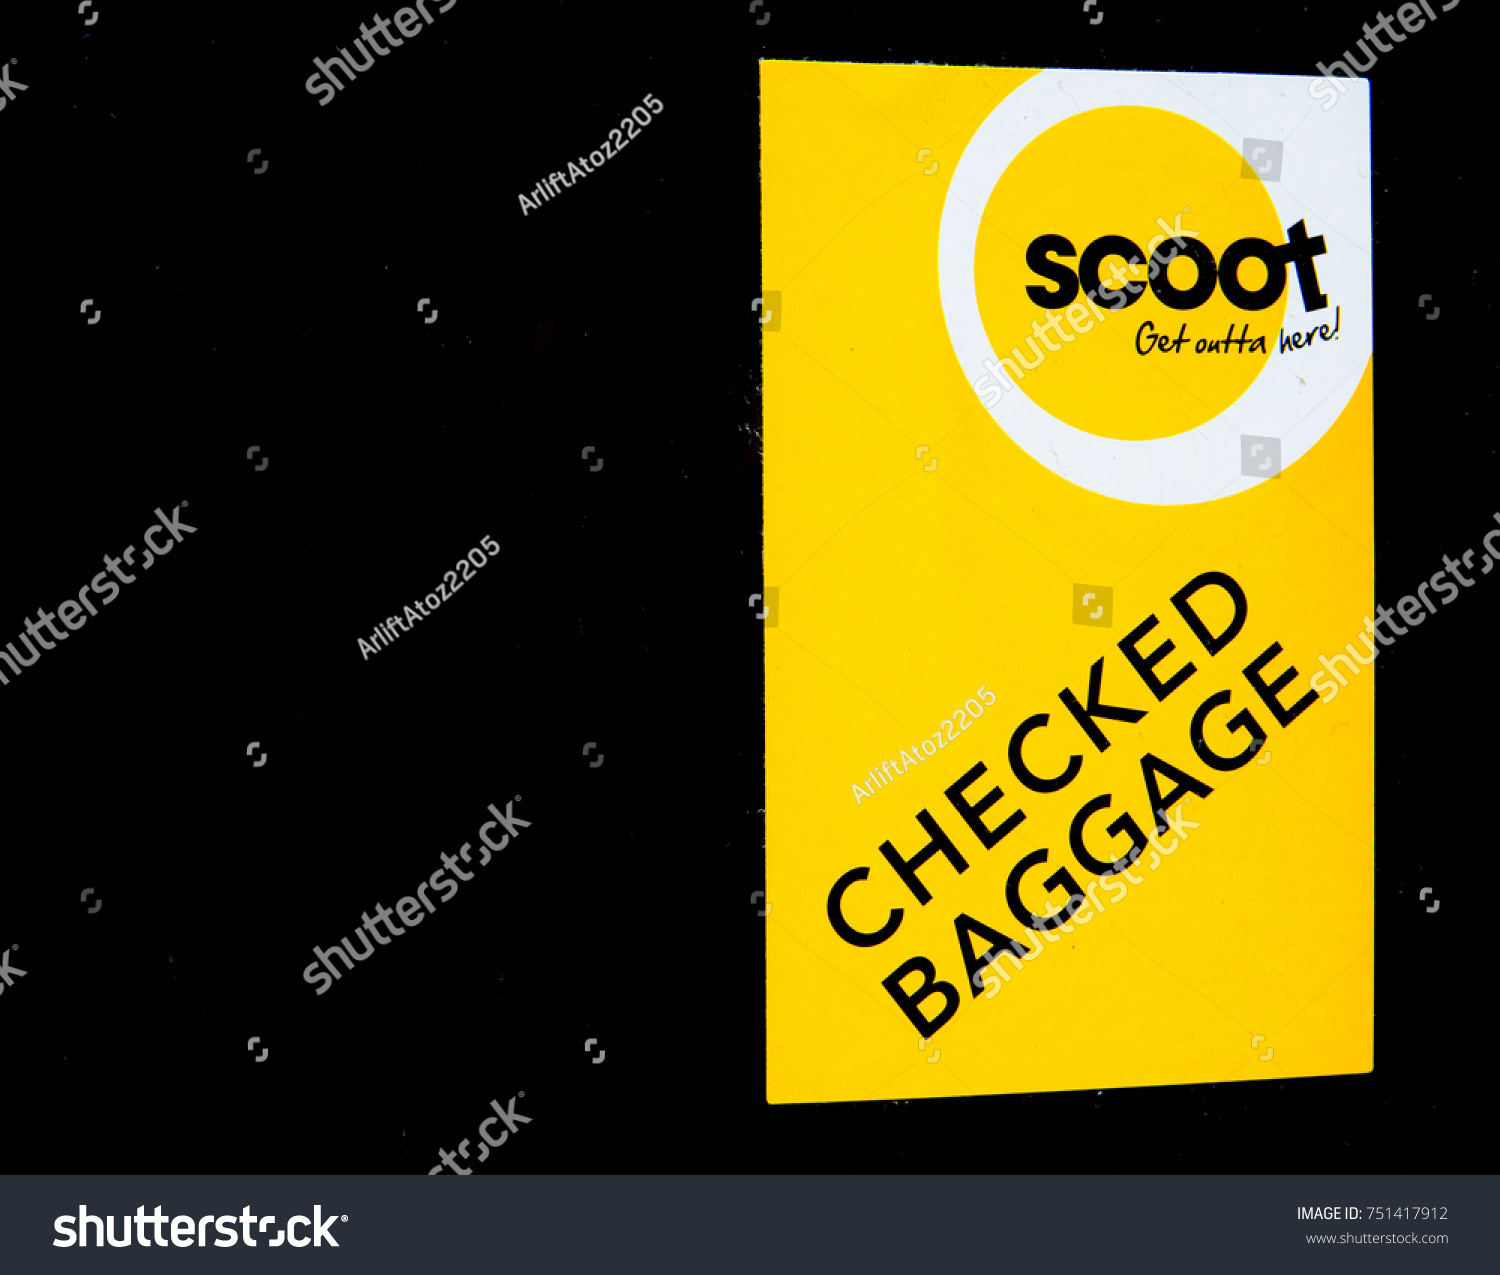 scoot upgrade baggage